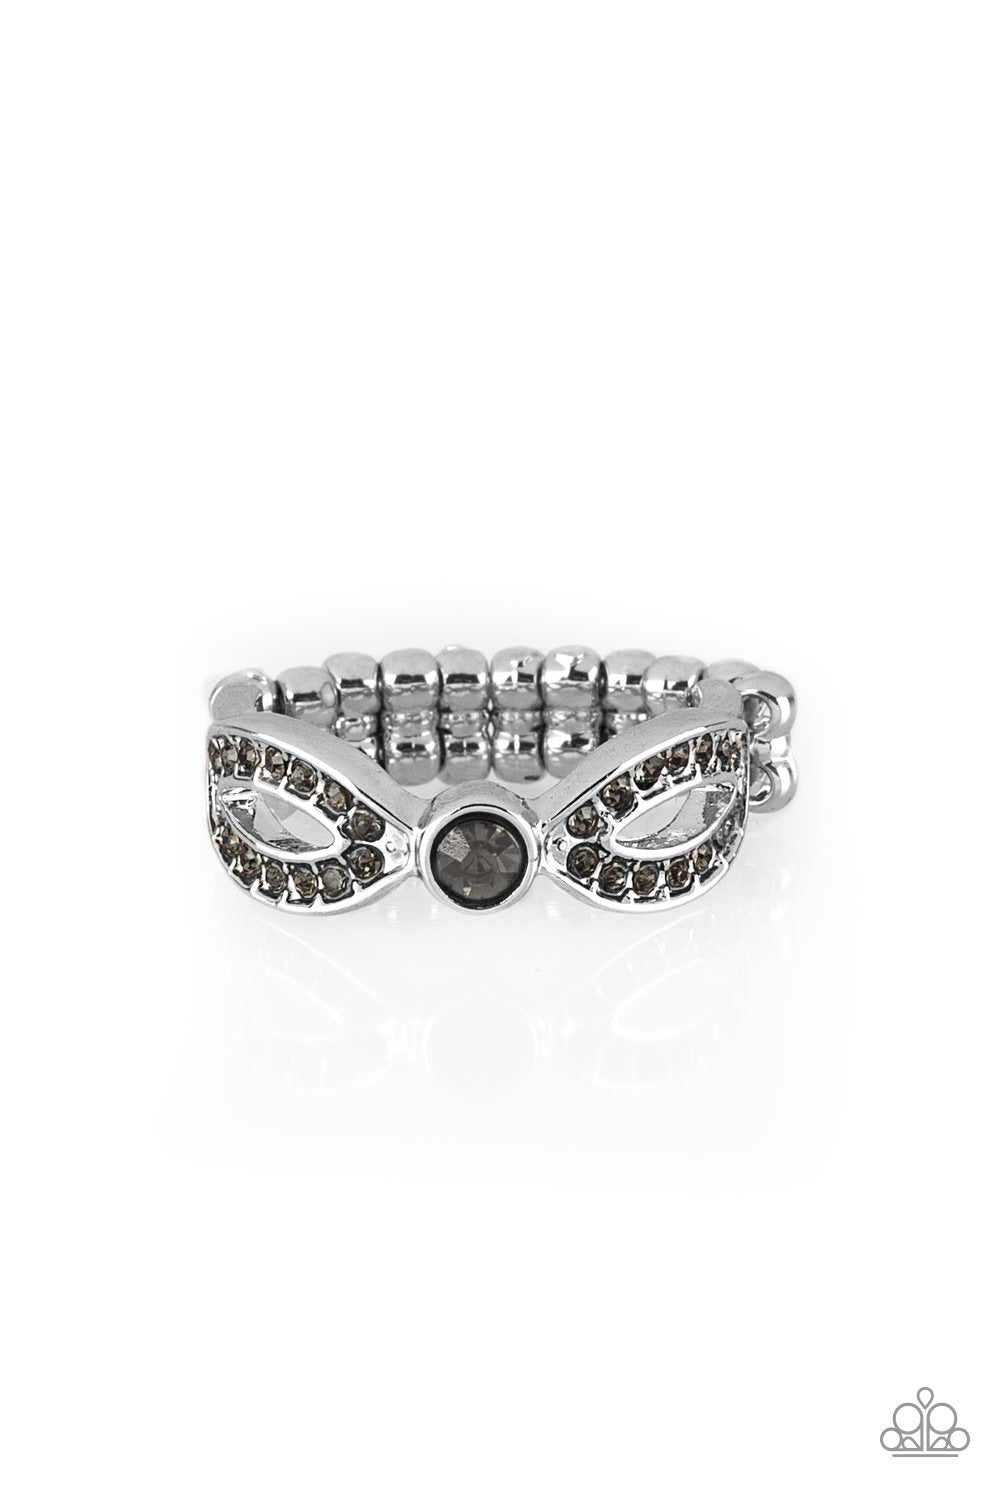 Extra Side of Elegance Silver Rhinestone Ring - Paparazzi Accessories - lightbox -CarasShop.com - $5 Jewelry by Cara Jewels